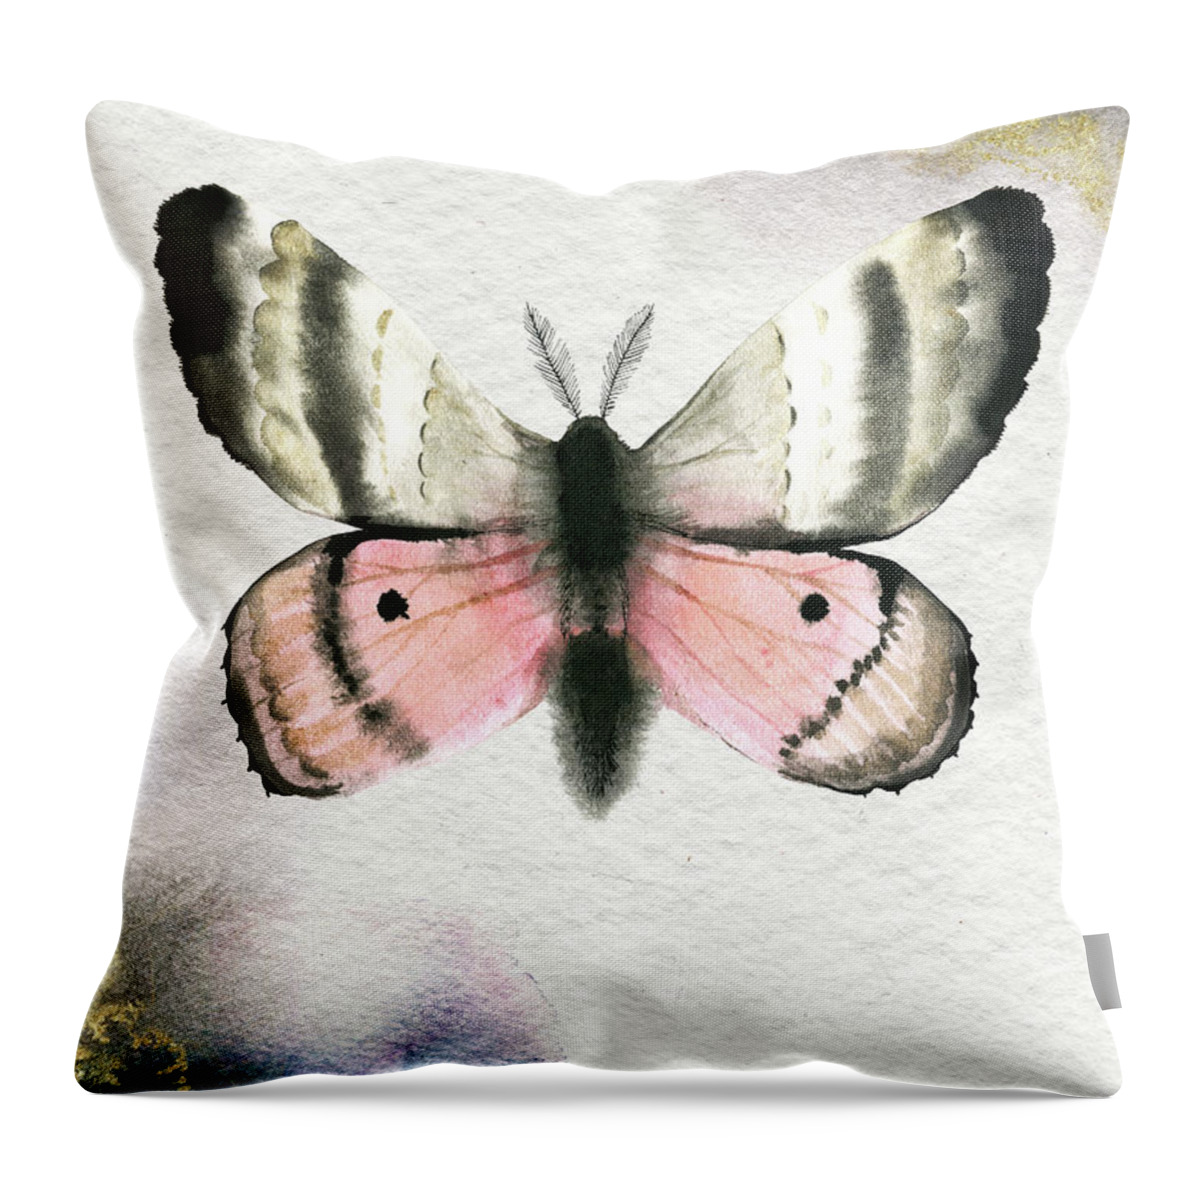 Pandora Moth Throw Pillow featuring the painting Pandora Moth by Garden Of Delights